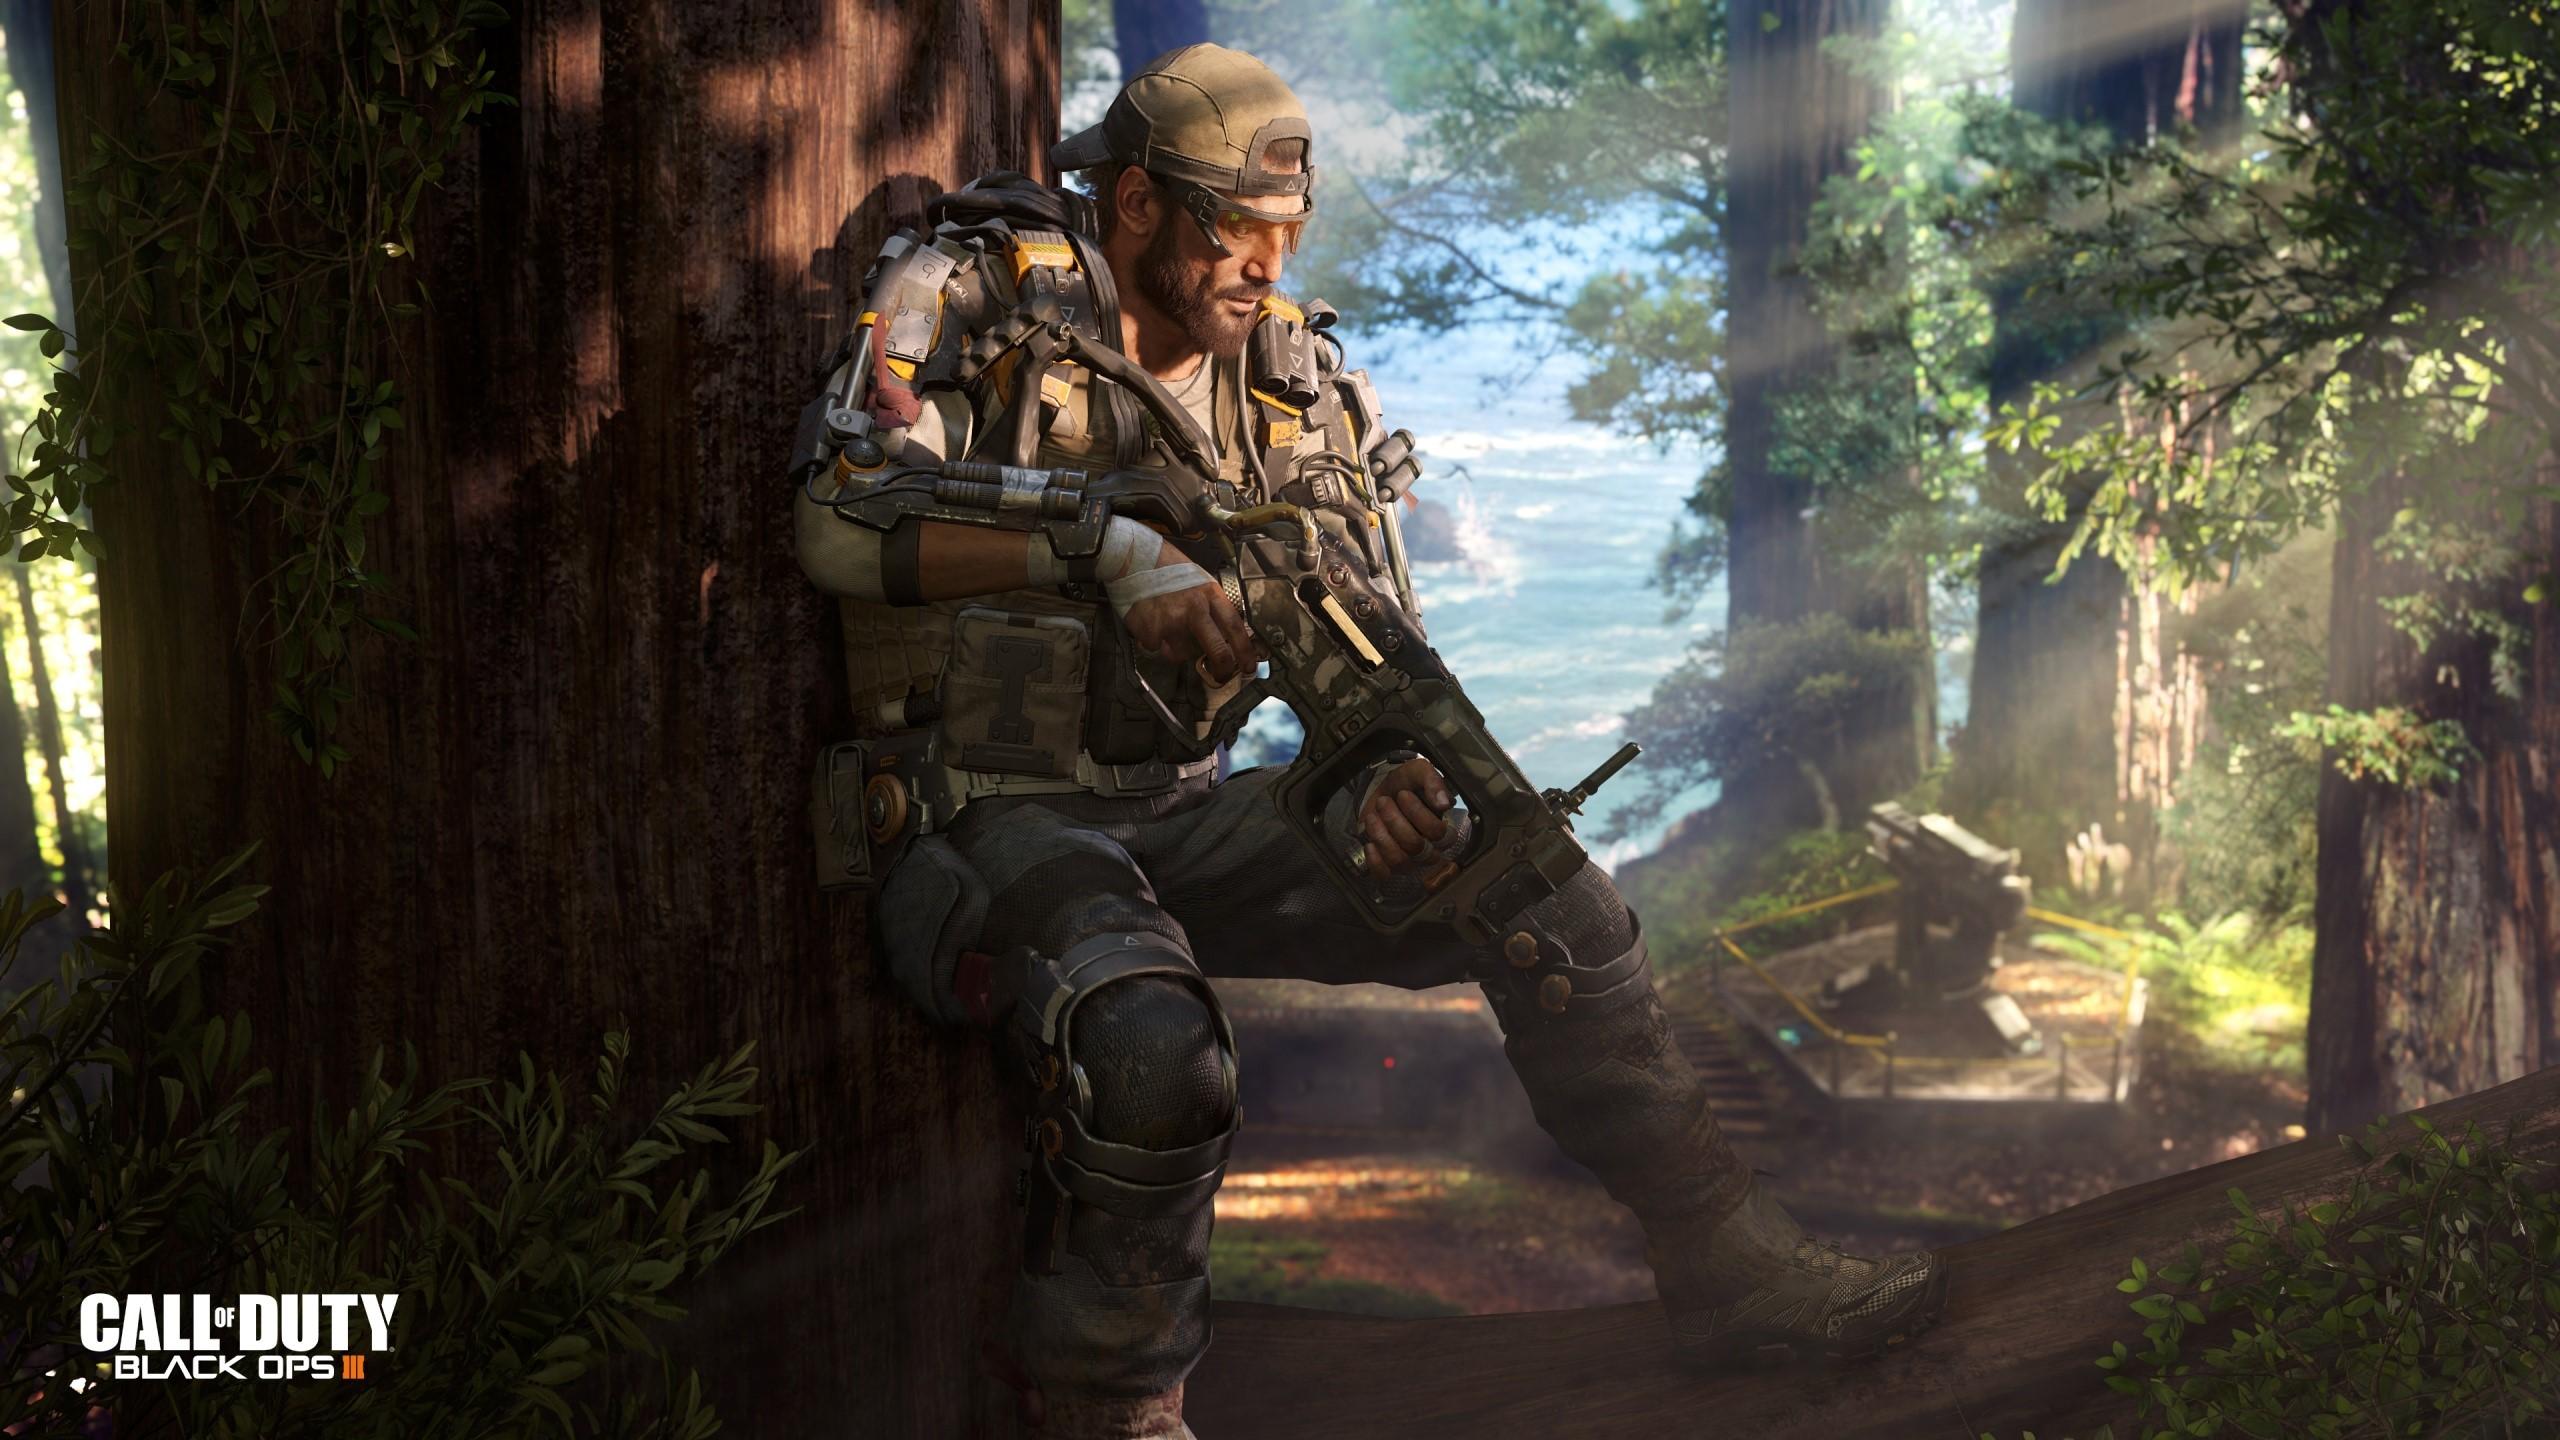 Specialist Nomad of Call of Duty Black Ops 3 Wallpaper 2k